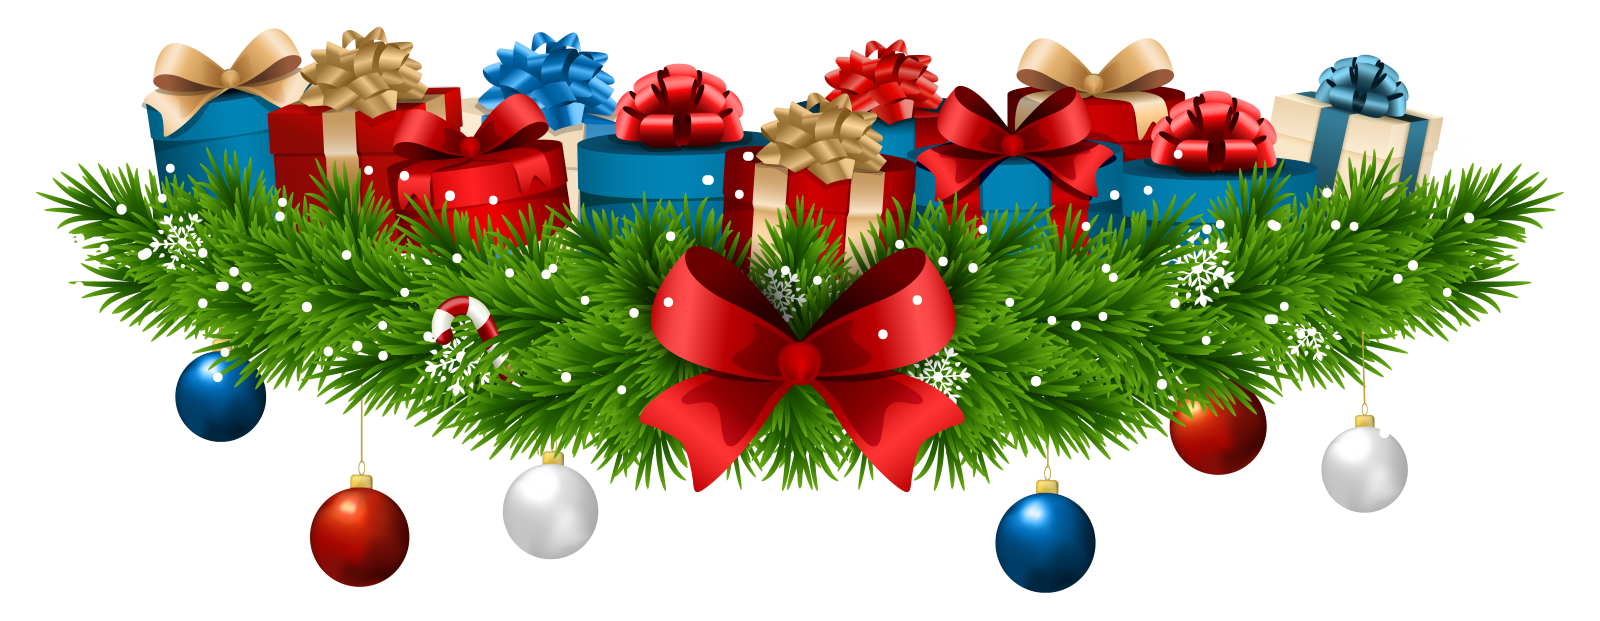 christmas-gift-clipart-16.png